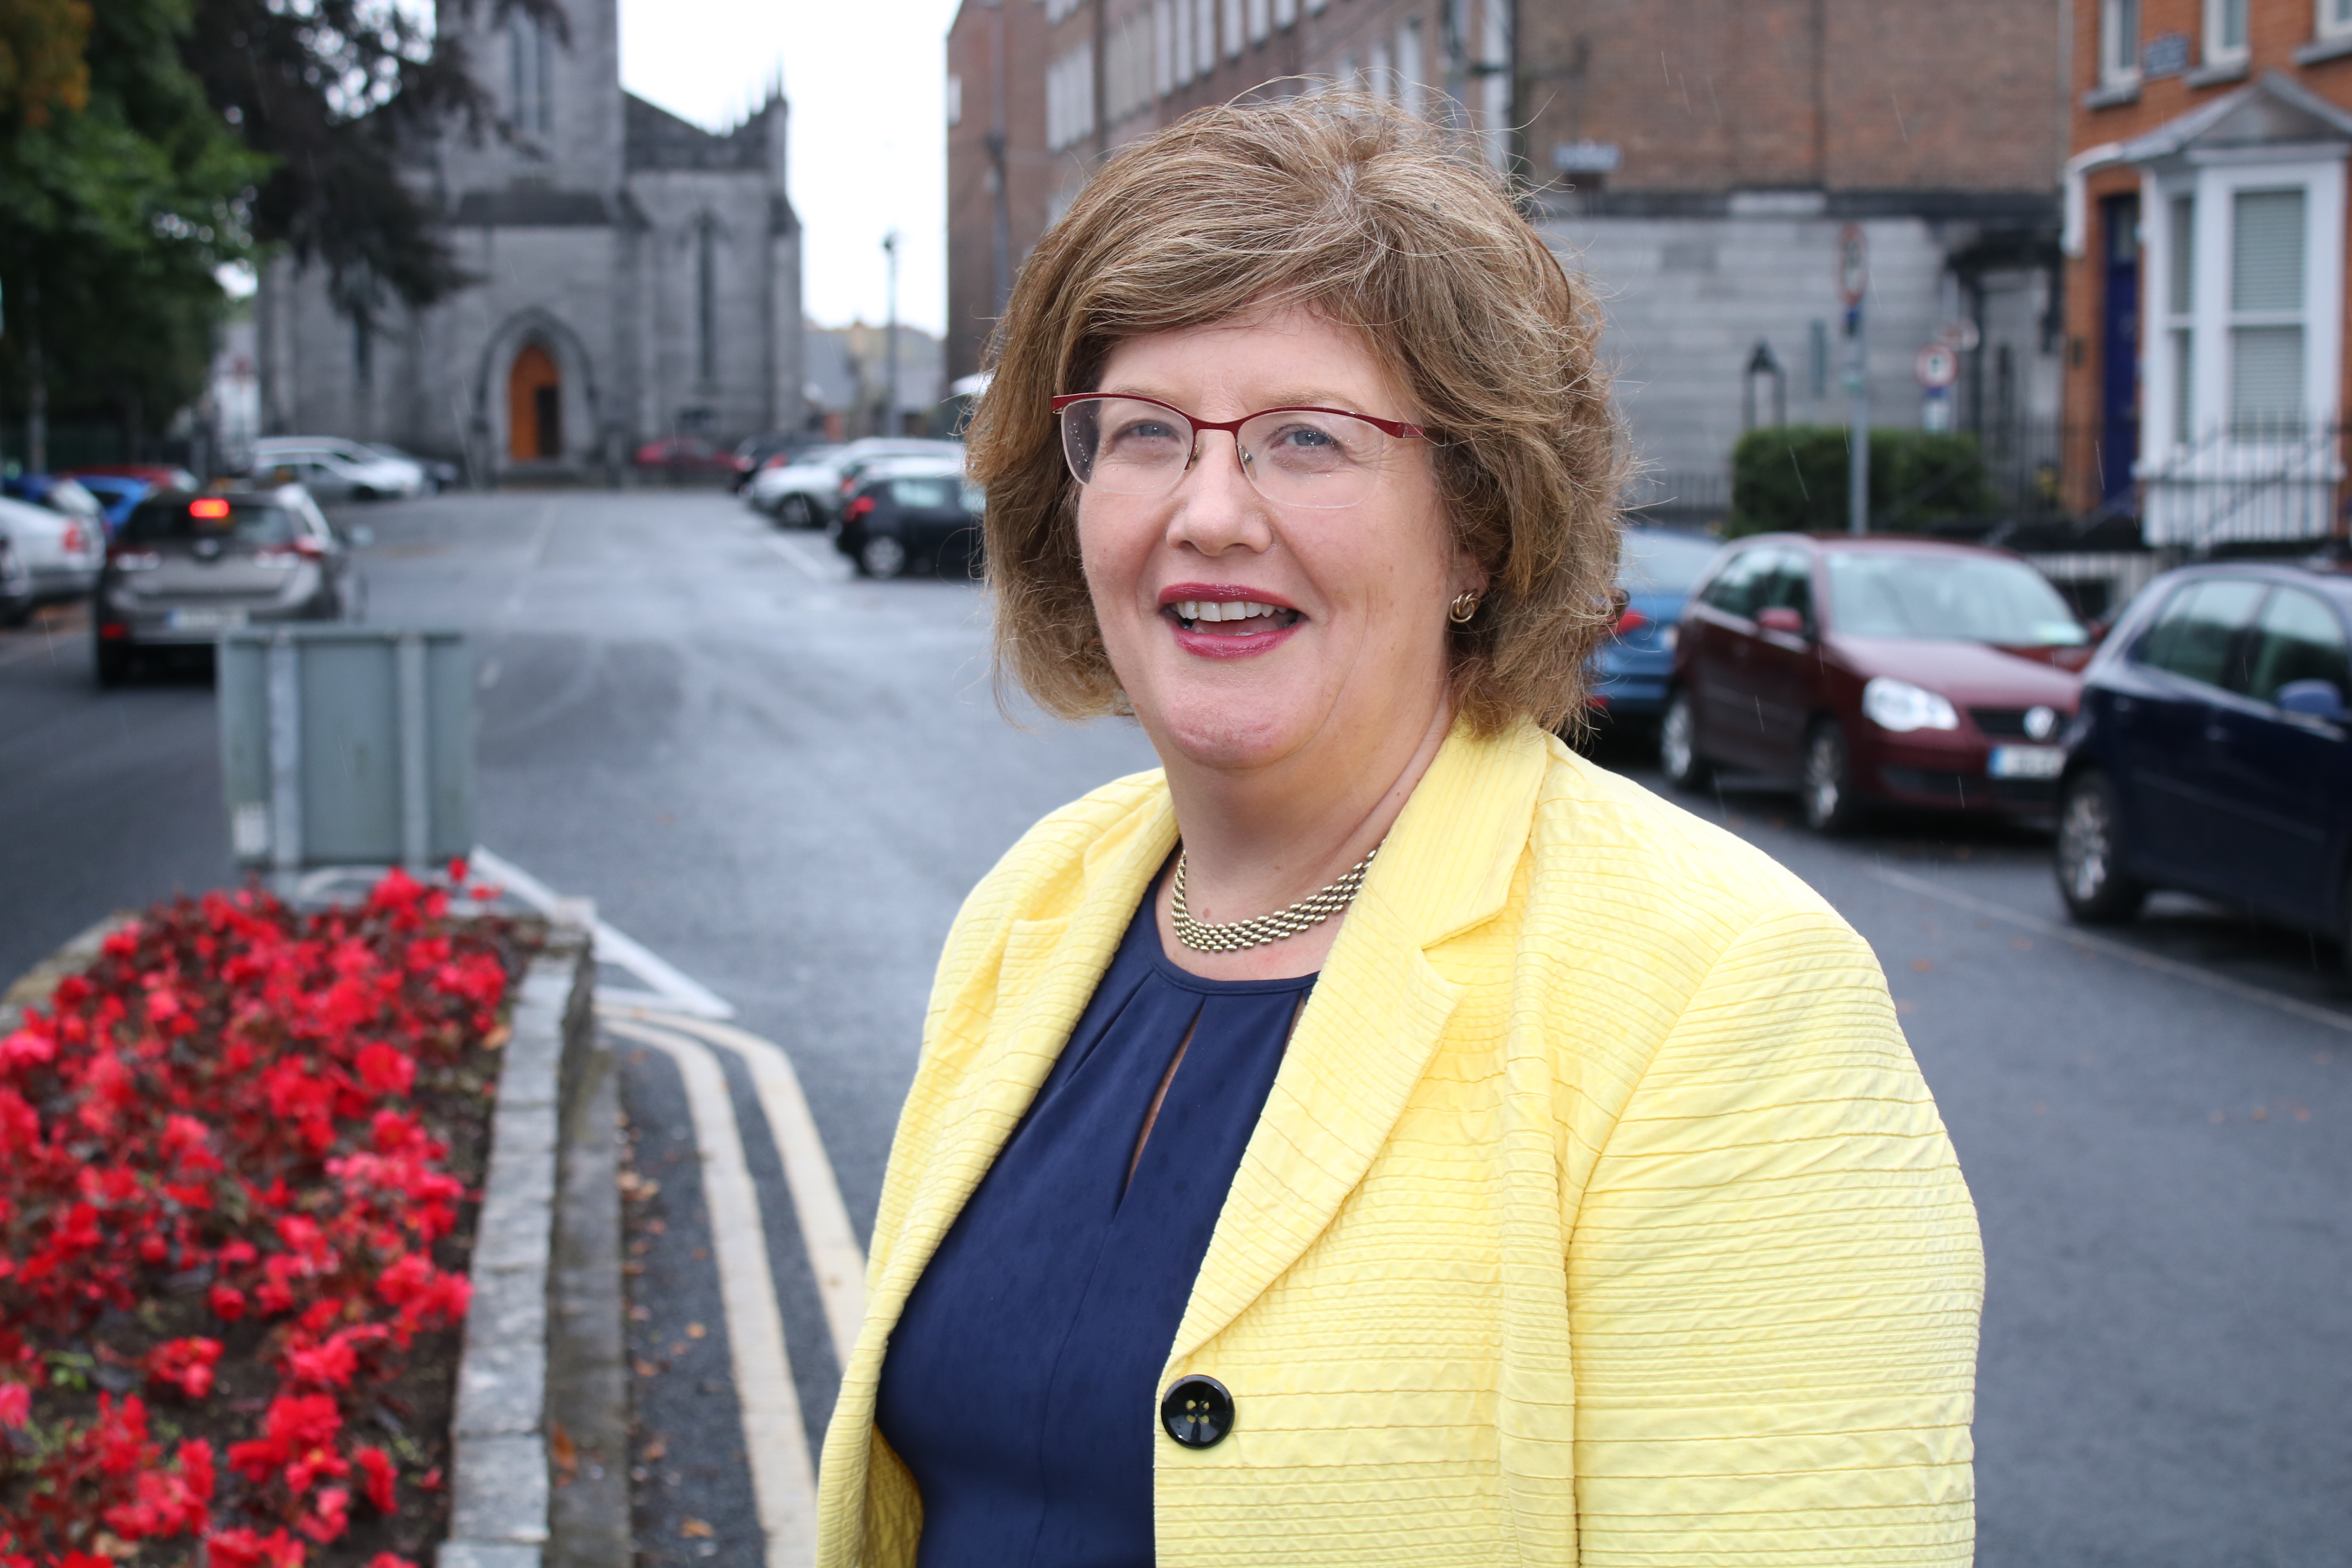 Limerick senator wants greater support for carers